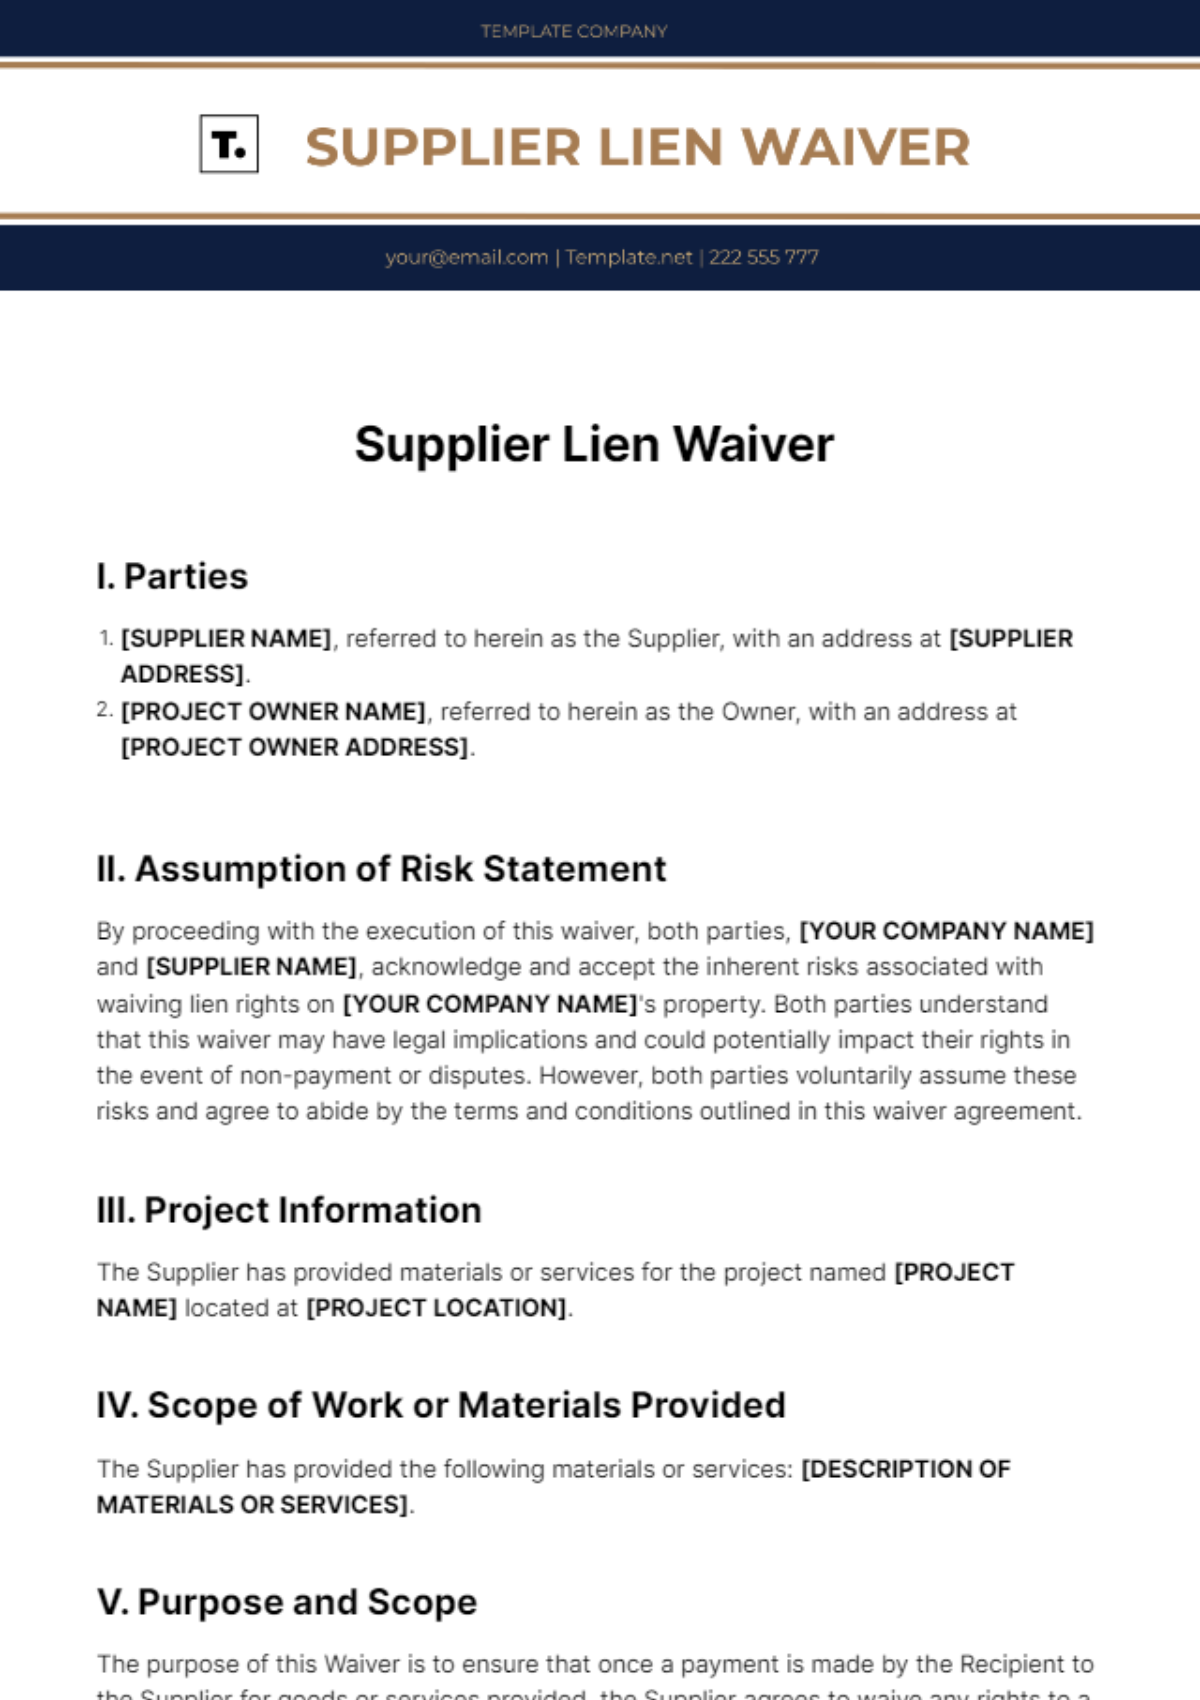 Free Supplier Lien Waiver Template